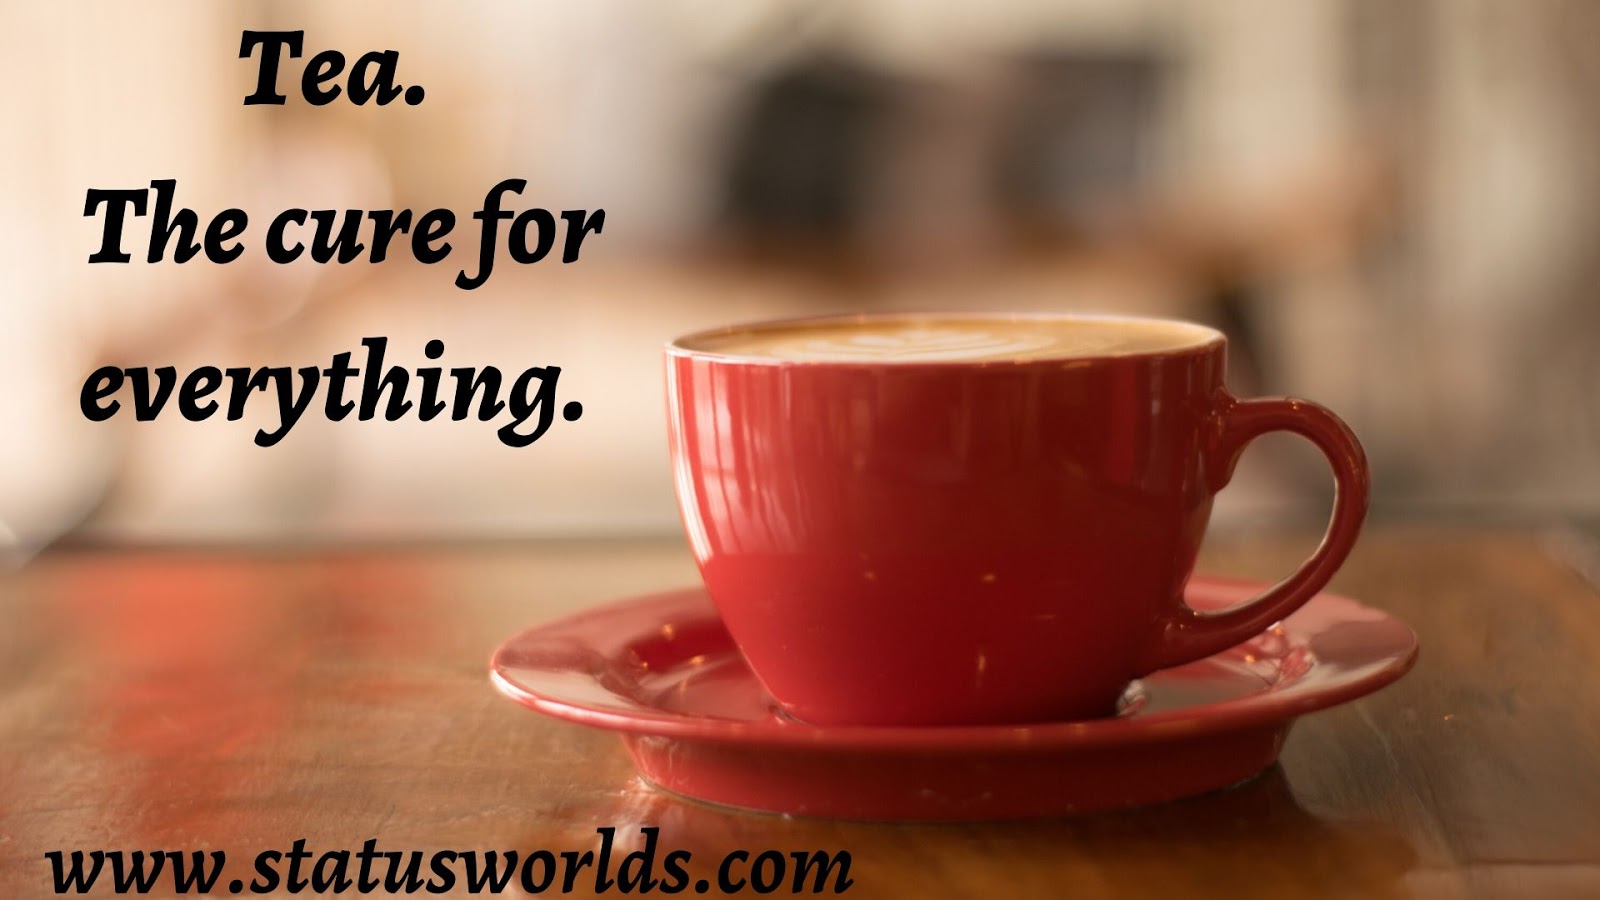 Best Of Best ] Tea Captions, Status & Quotes For A Tea Lover - Status World